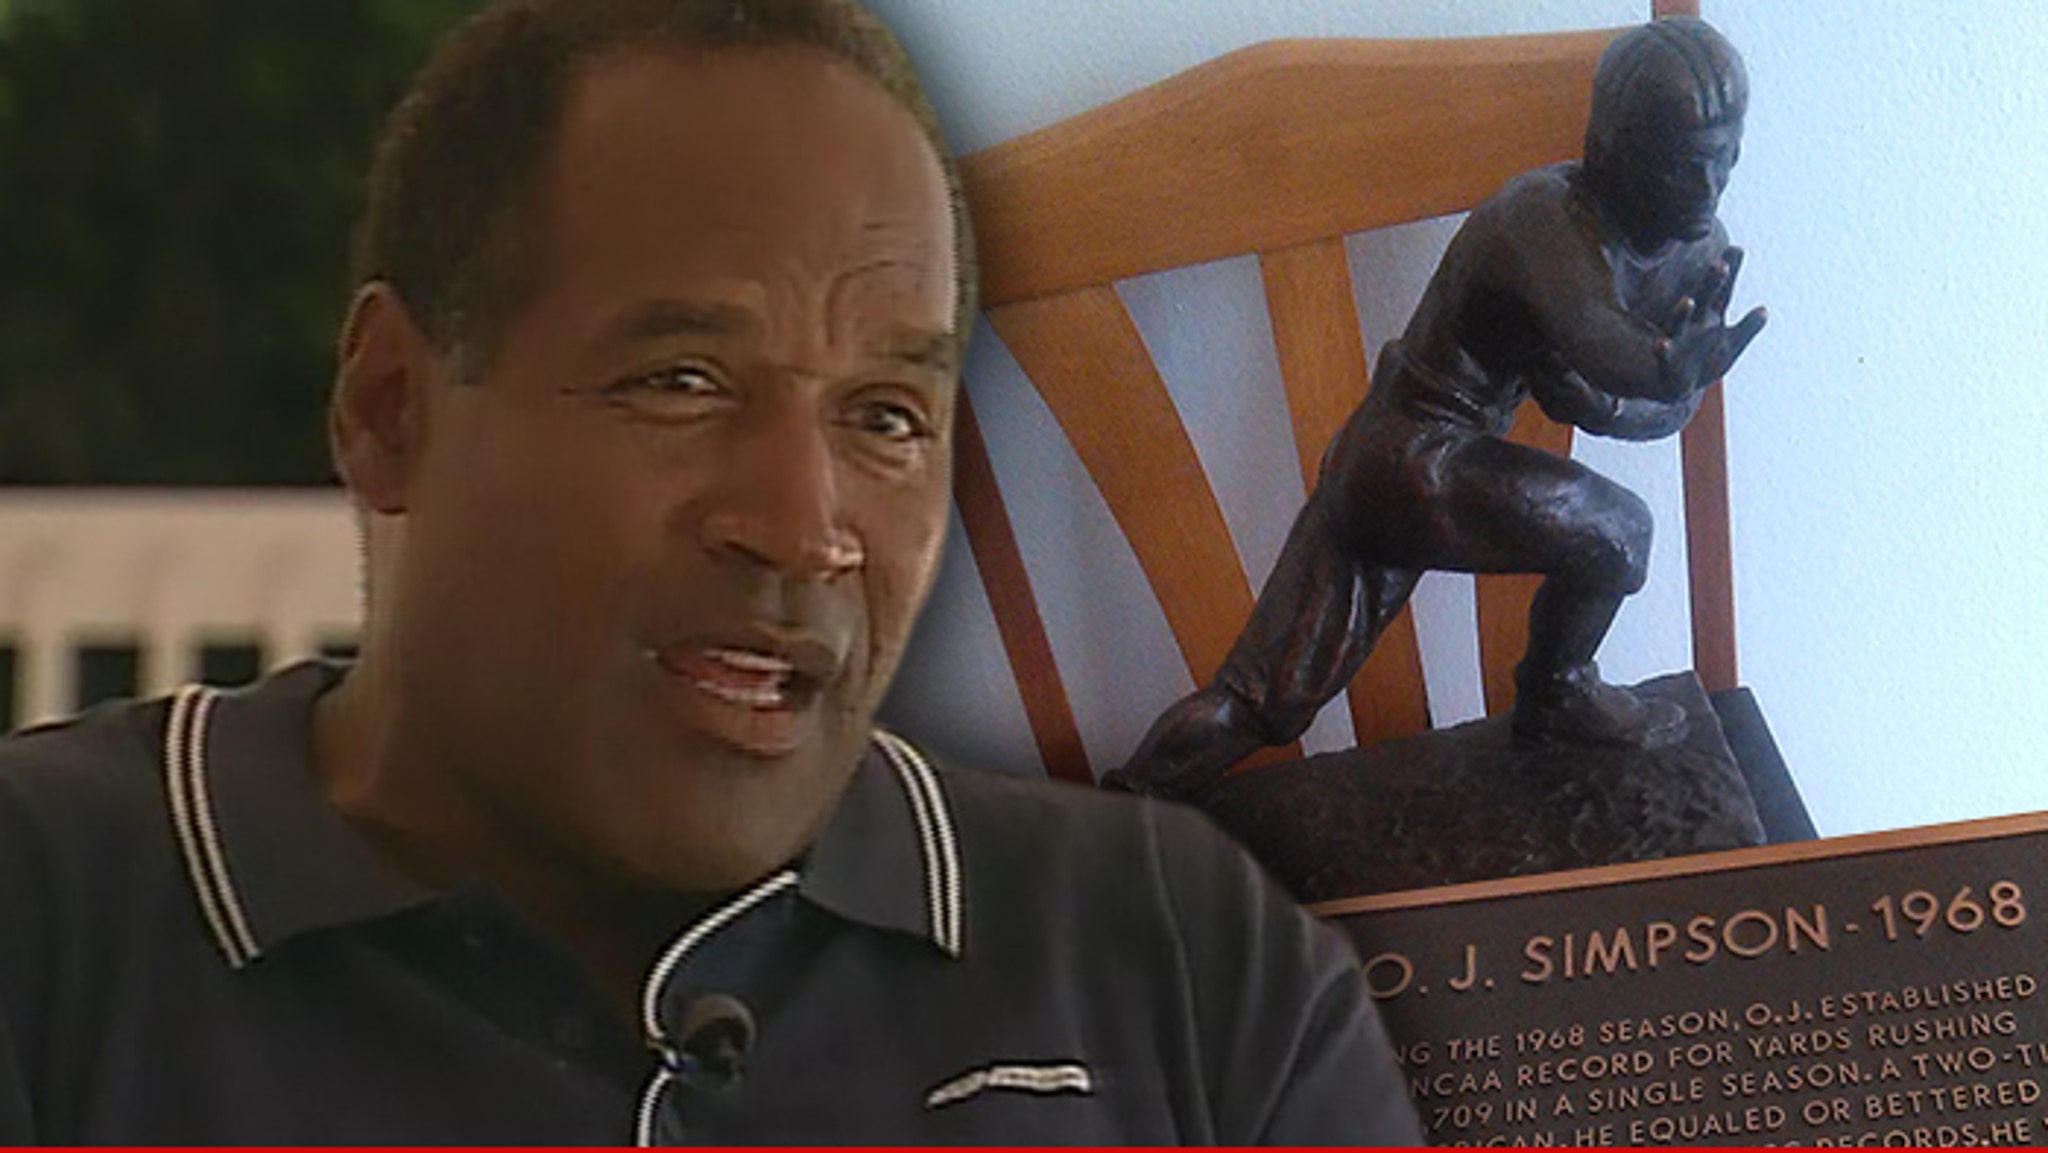 Los Angeles police recover O.J. Simpsons Heisman trophy 